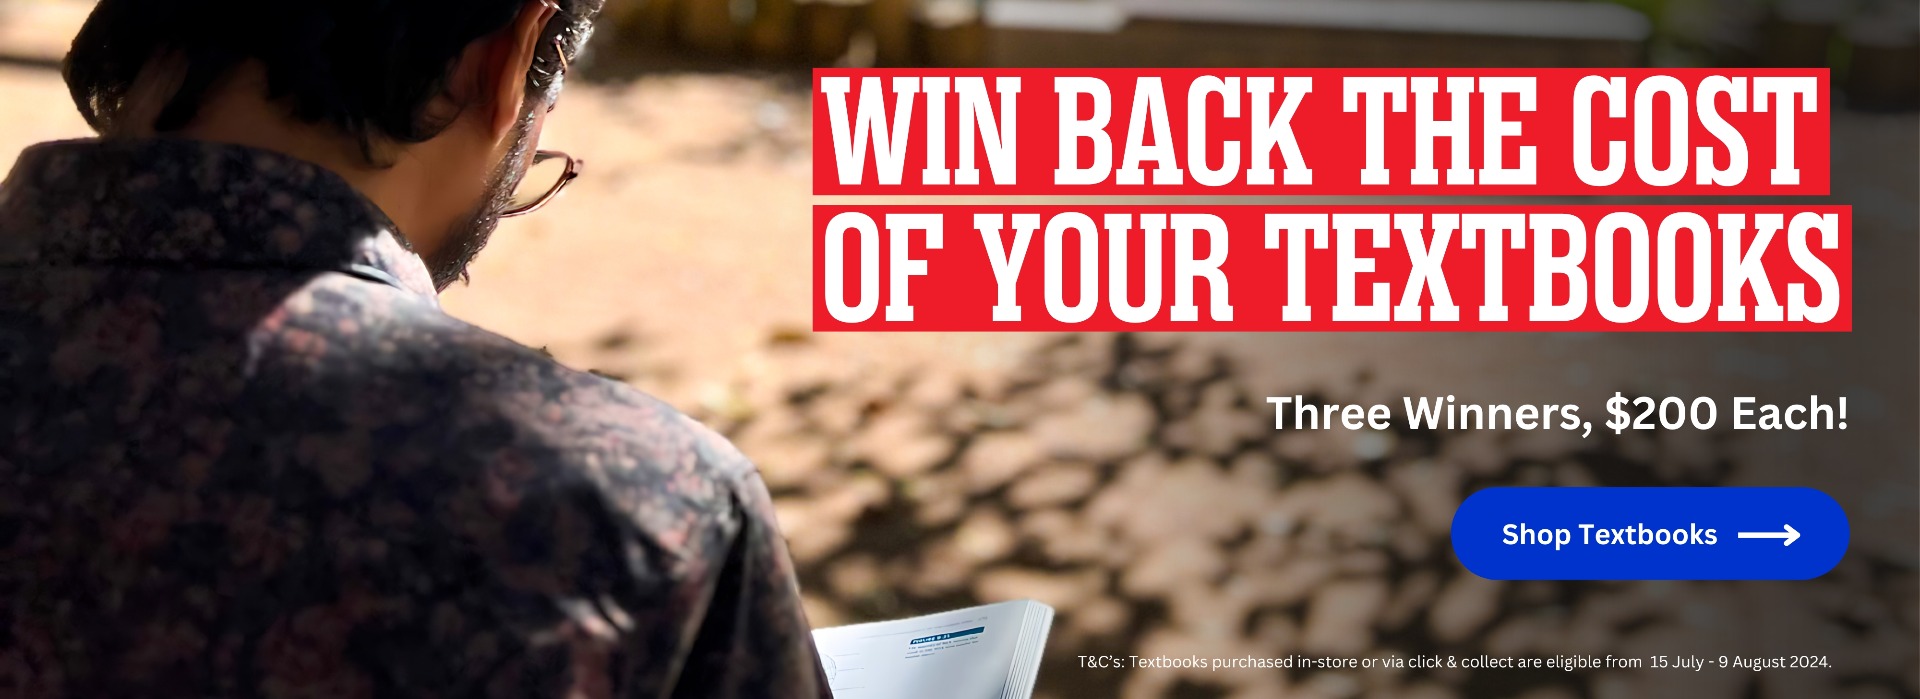 Win Back the Cost of Your Textbooks Banner